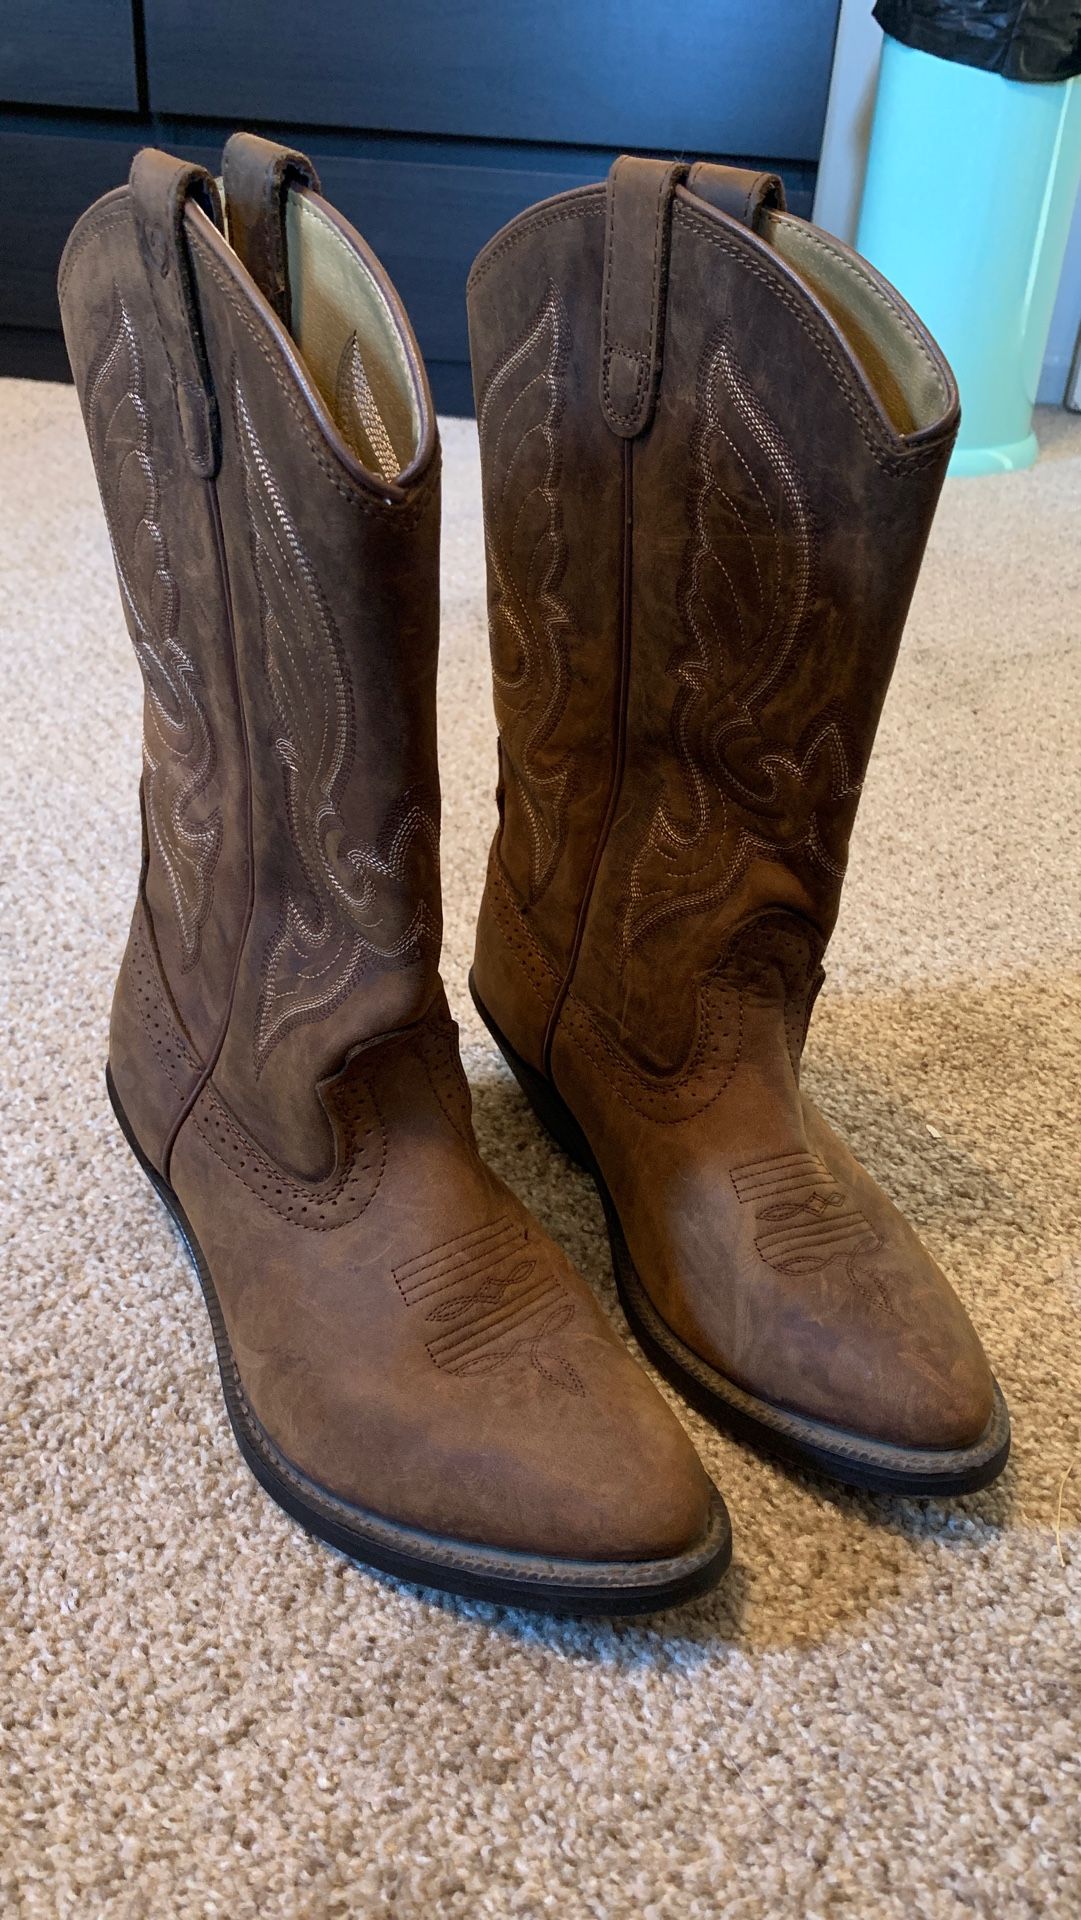 Cowgirl boots SHYANNE size 8 women’s